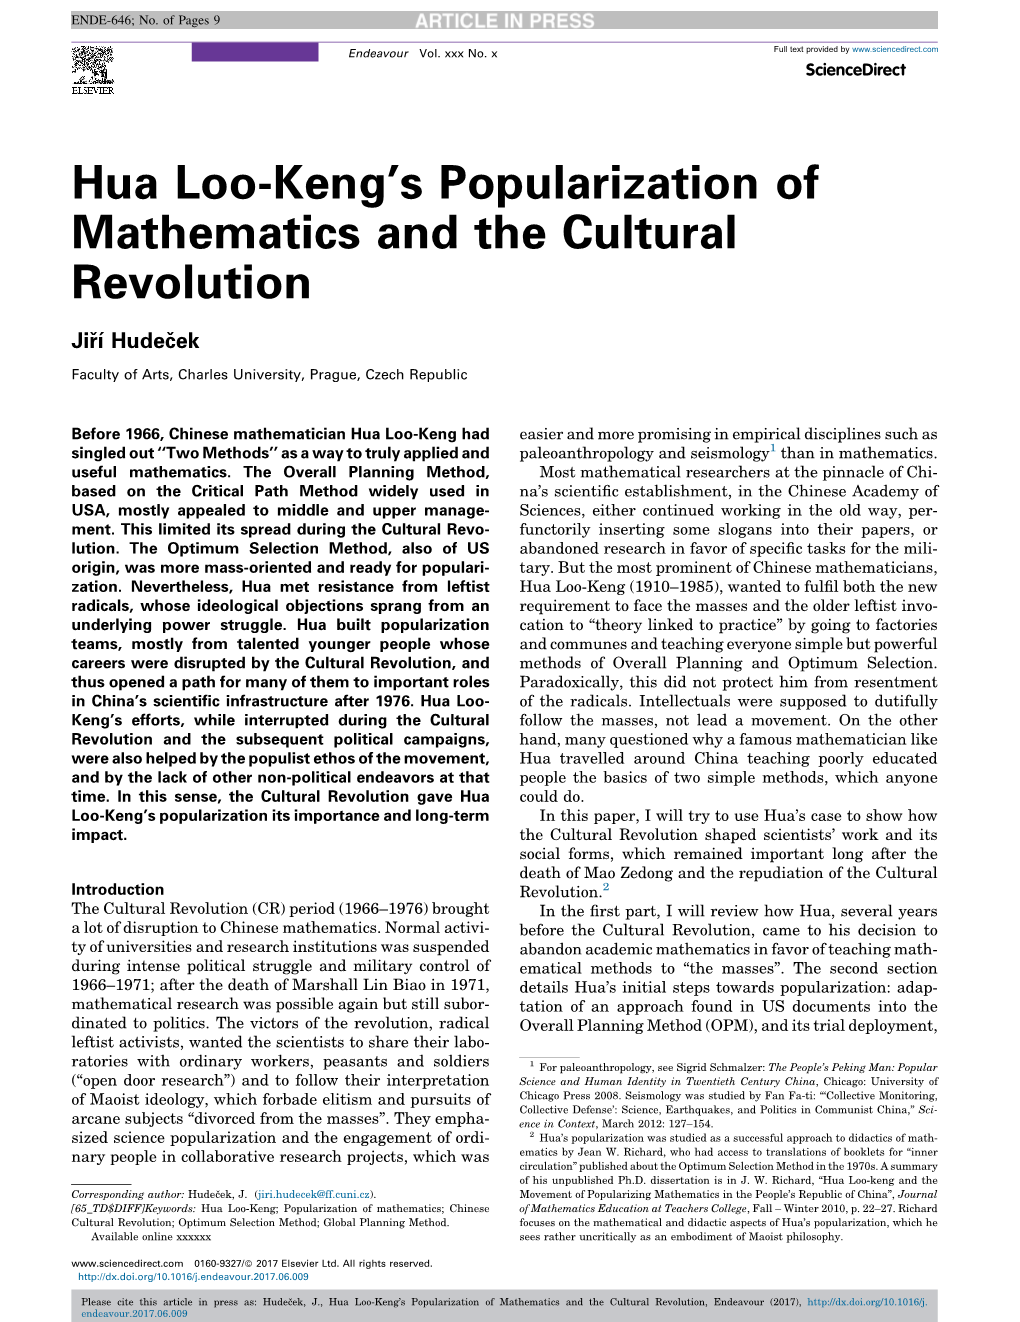 Hua Loo-Kengￃﾢￂﾀￂﾙs Popularization of Mathematics and the Cultural